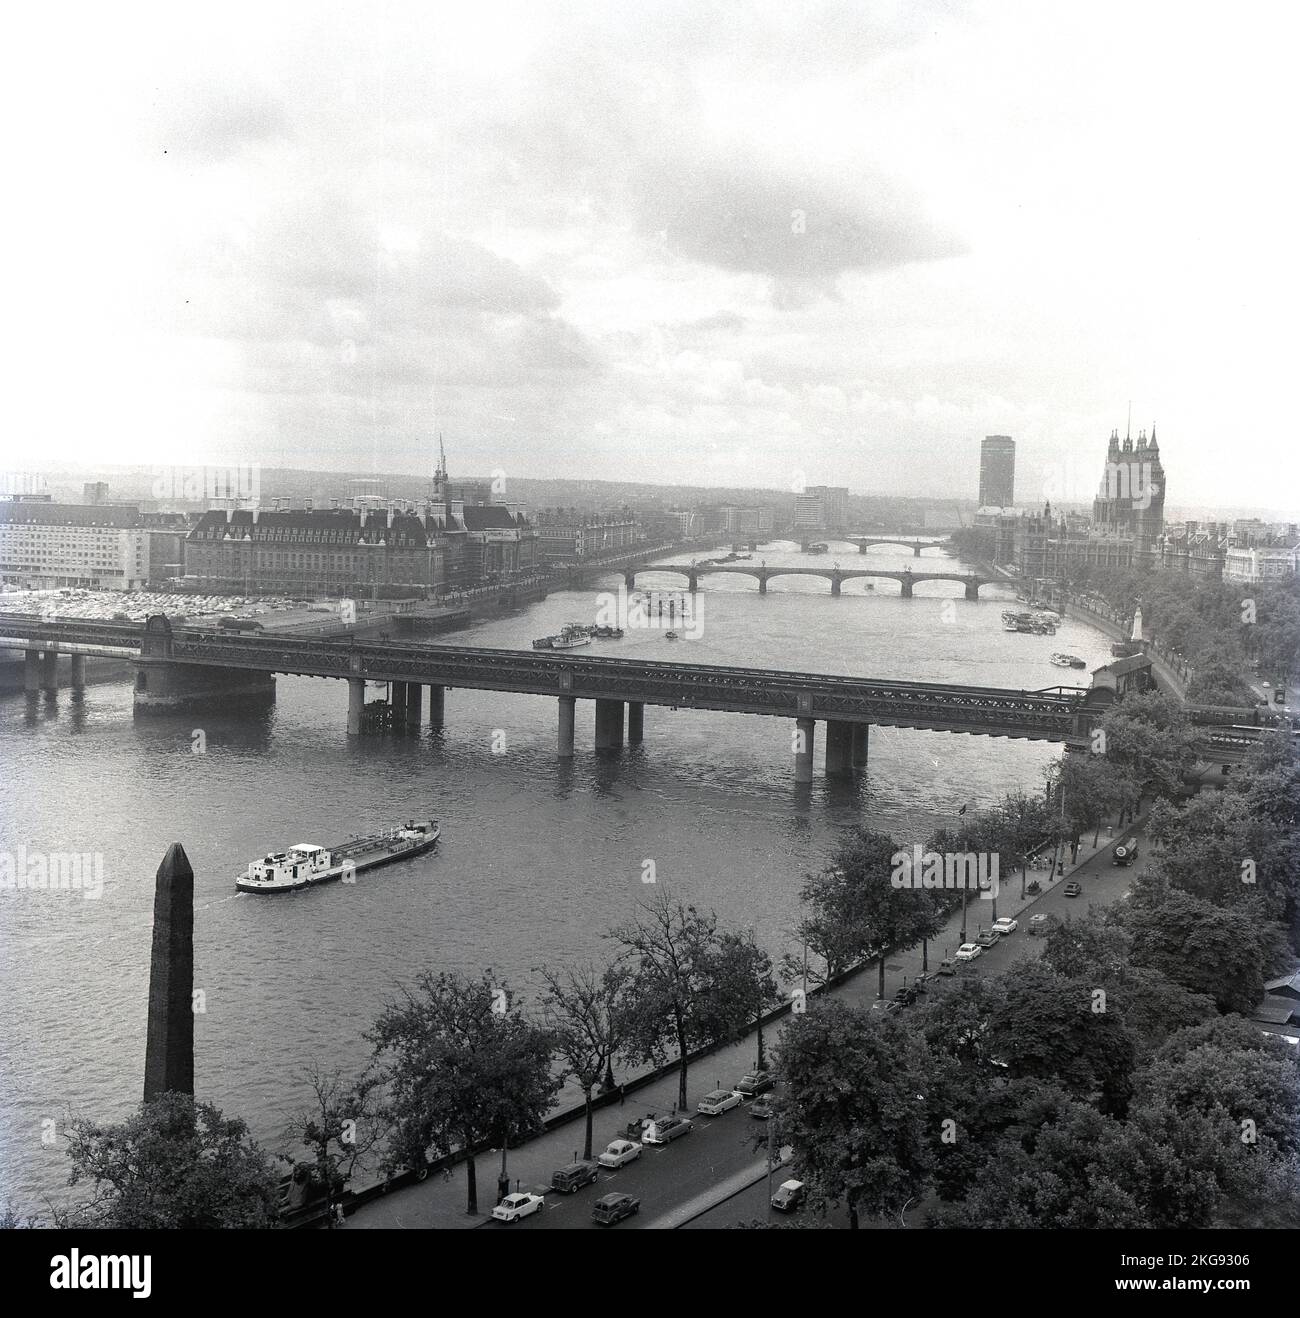 1950s, historical, view from above, possibly from the Shell Mex House, on the North side of the River Thames overlooking the Victoria Embankment, the River and the surrounding area of London. The Palace of Westminster, home of the UK Government and the Clock Tower (Big Ben) are on the right of the picture. On the near left, Cleopatra's Needle, a obelisk transported from Egypt to London in 1877. Stock Photo